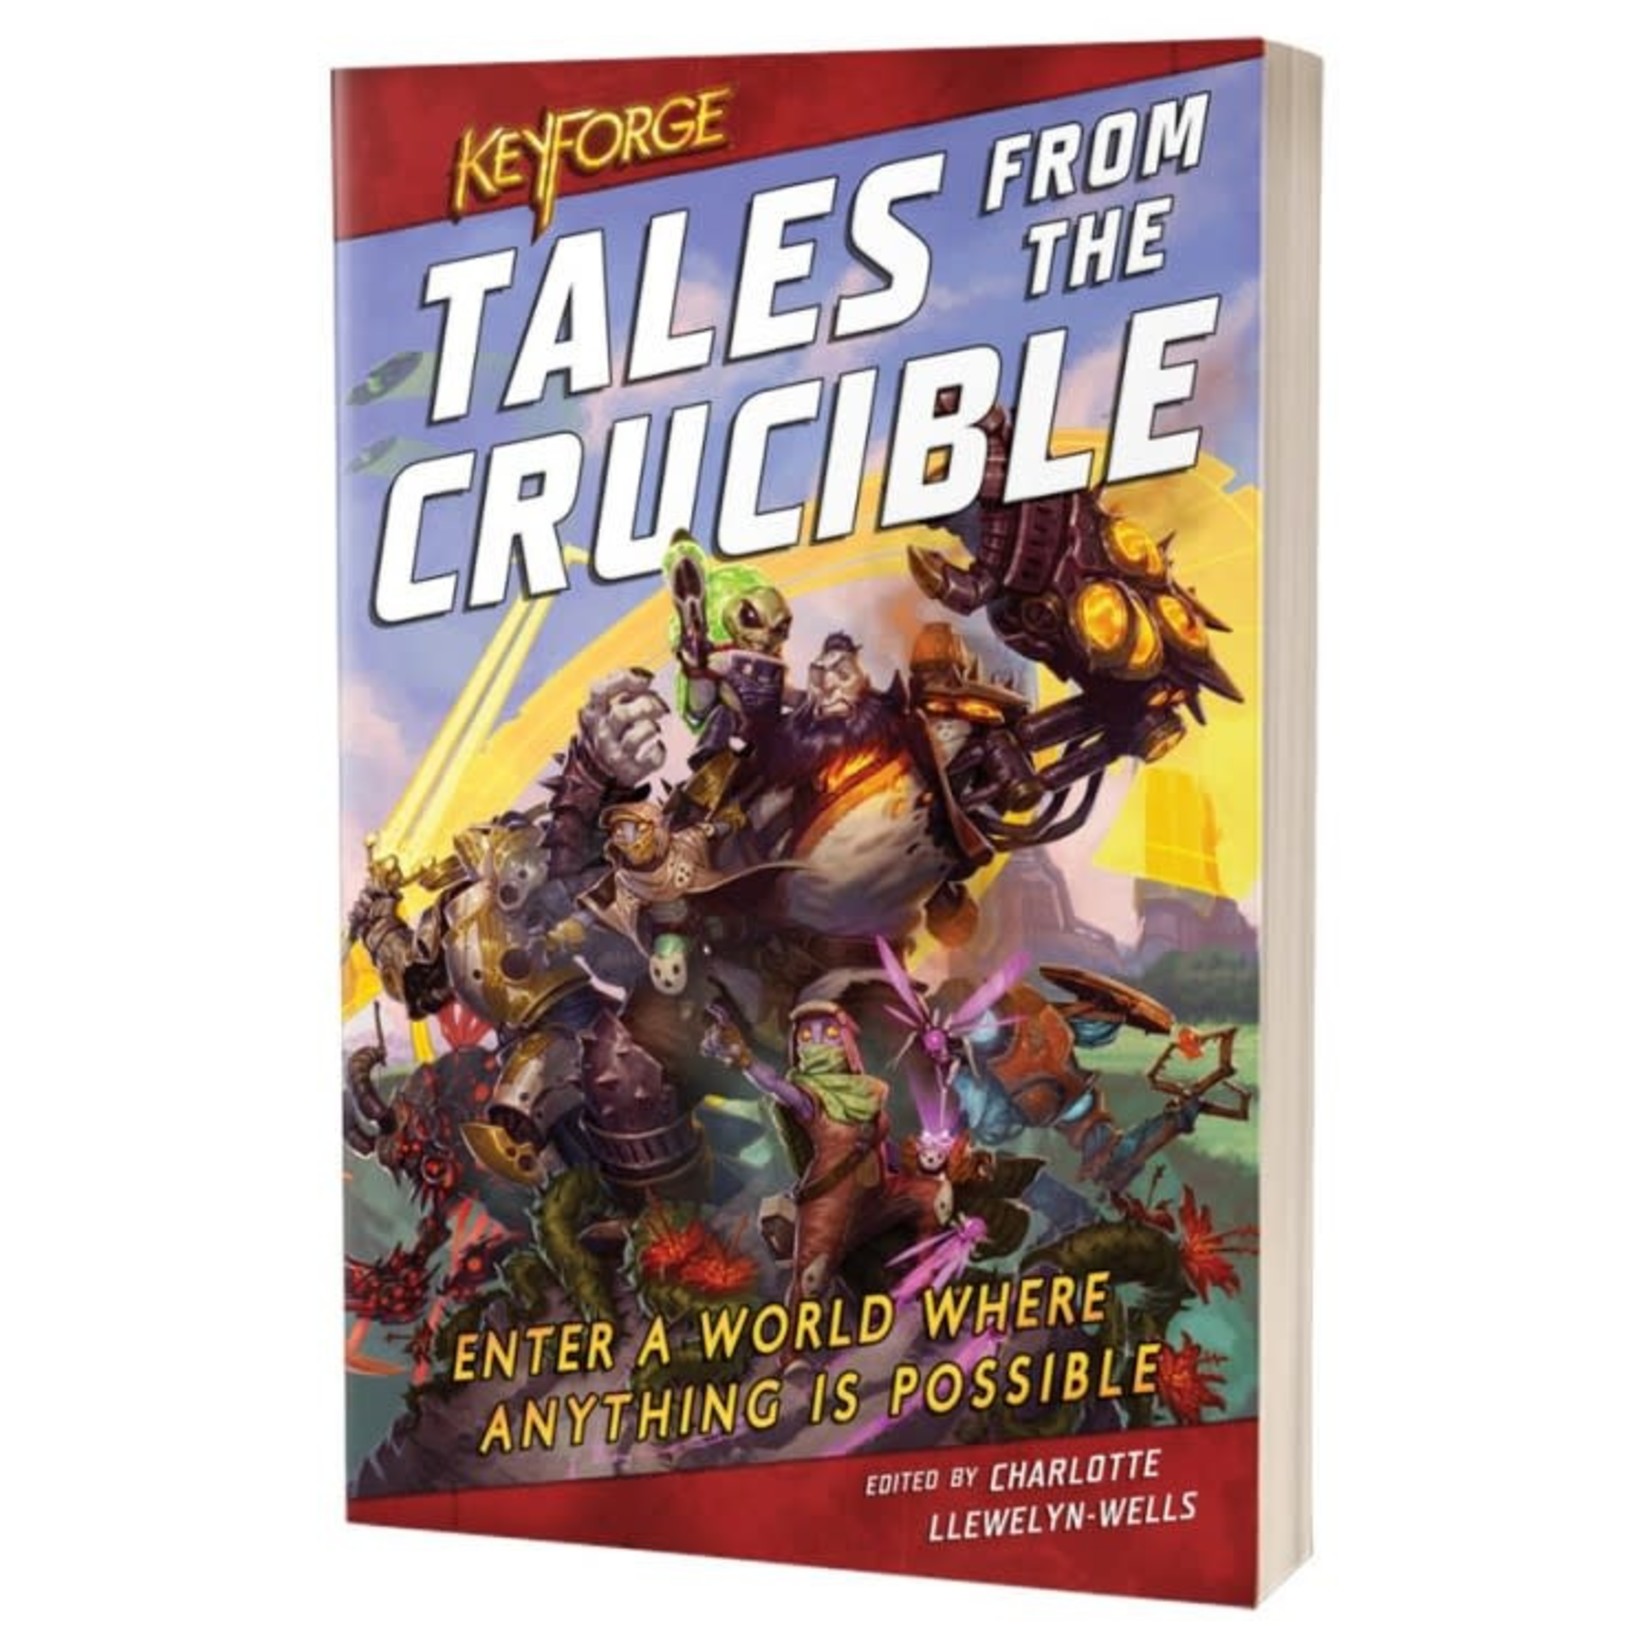 KeyForge: Tales from the Crucible (Novel)